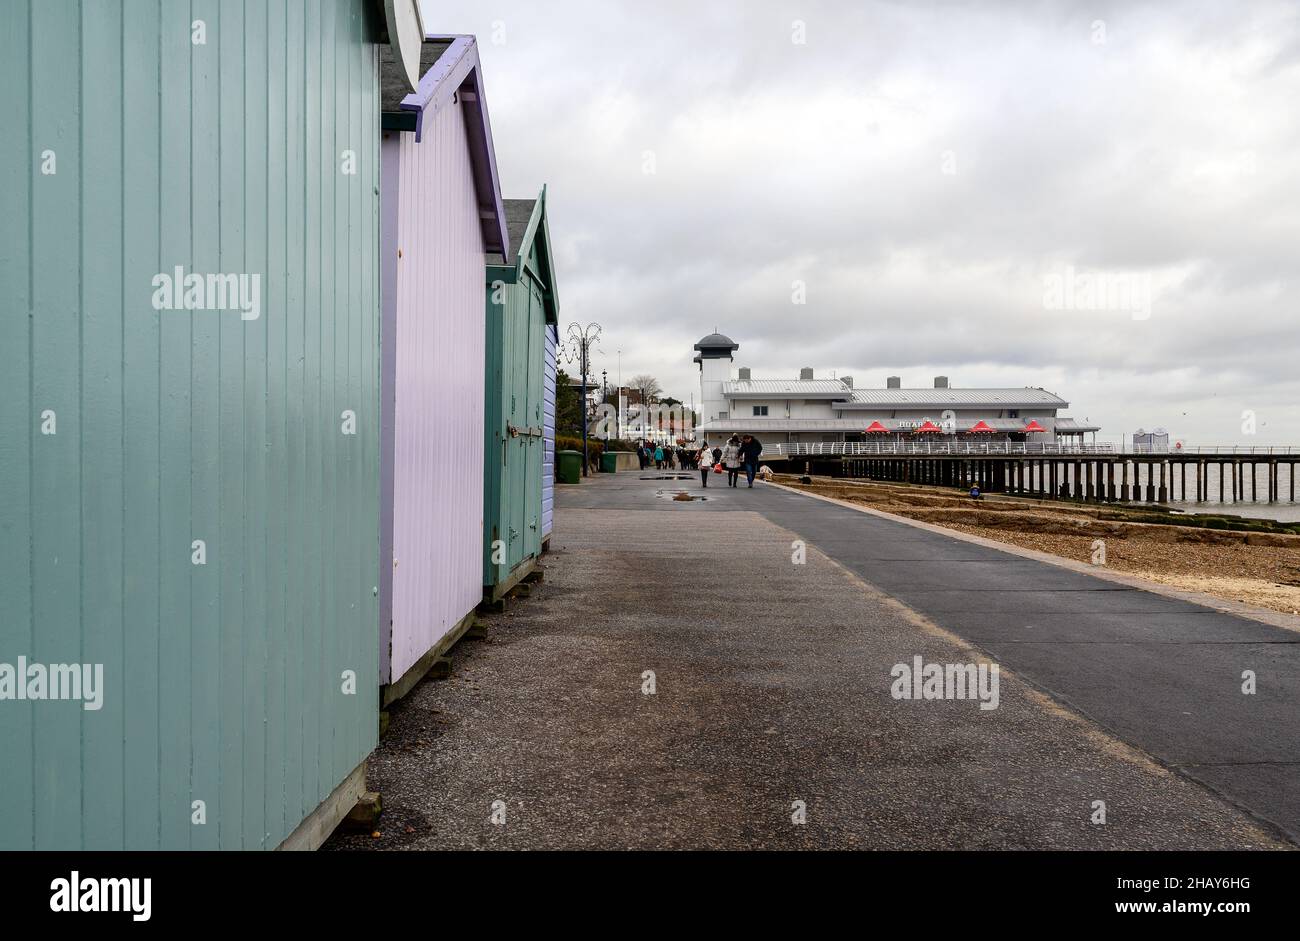 Felixstowe, Suffolk, UK:  People walk along Felixstowe promenade on a cold and dull winter's day past a line of beach huts and the pier. Stock Photo